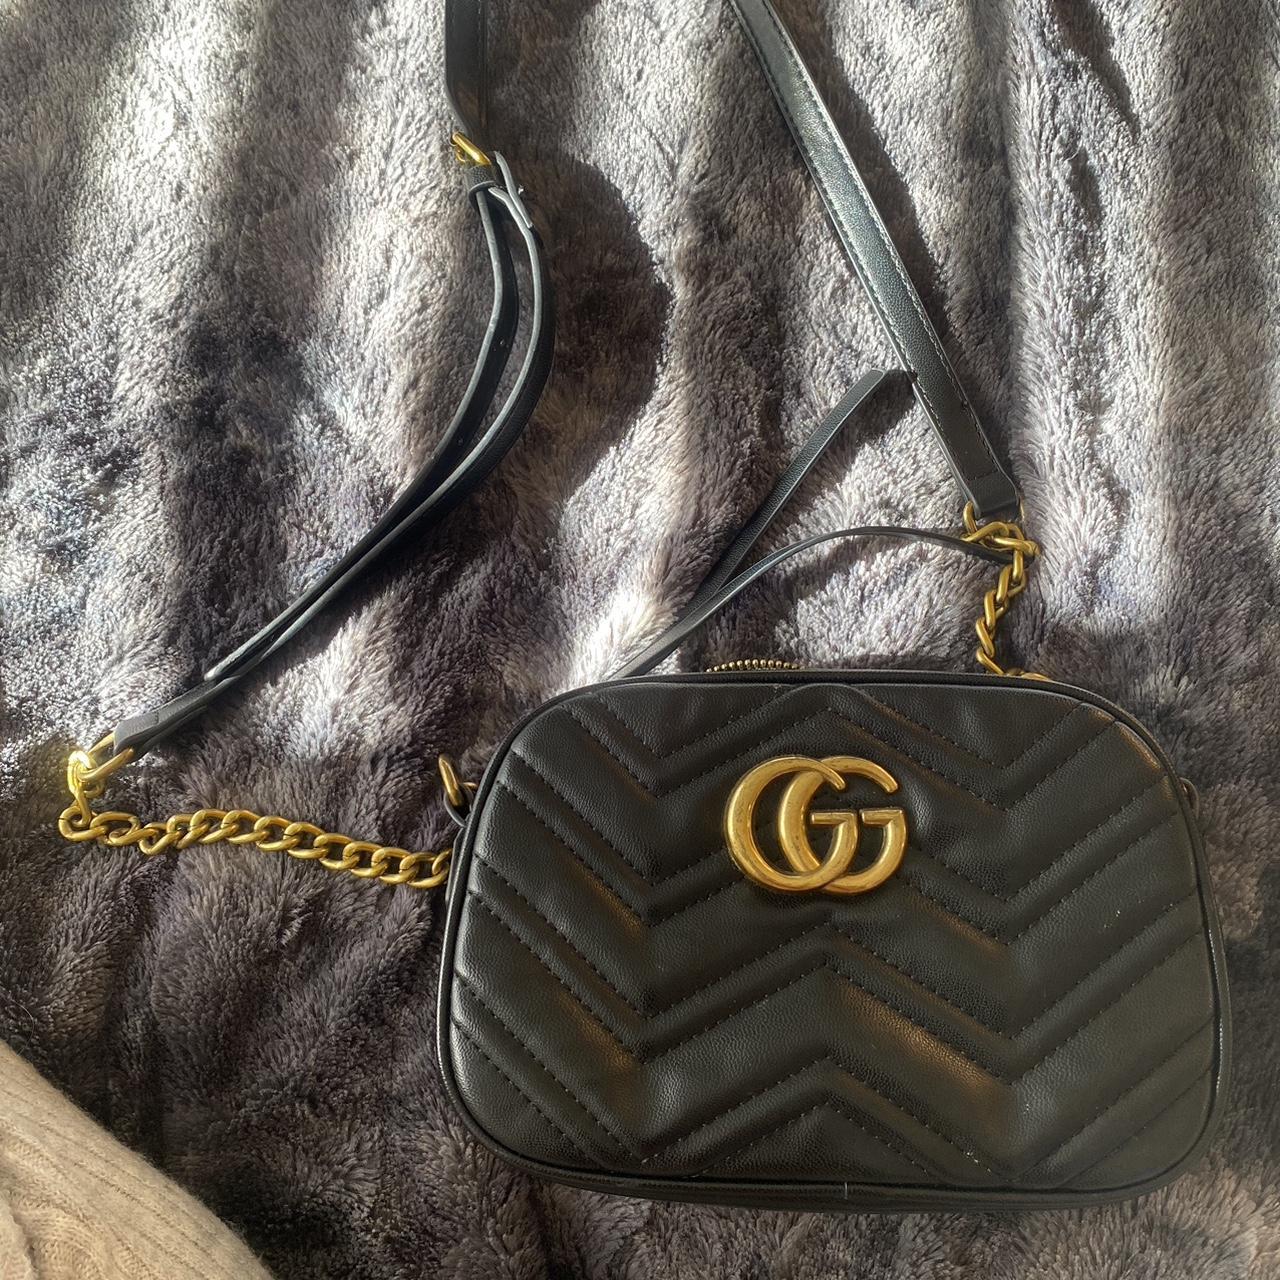 Gucci Red Leather Tote Bag Chain Handle ❌ PRICE - Depop